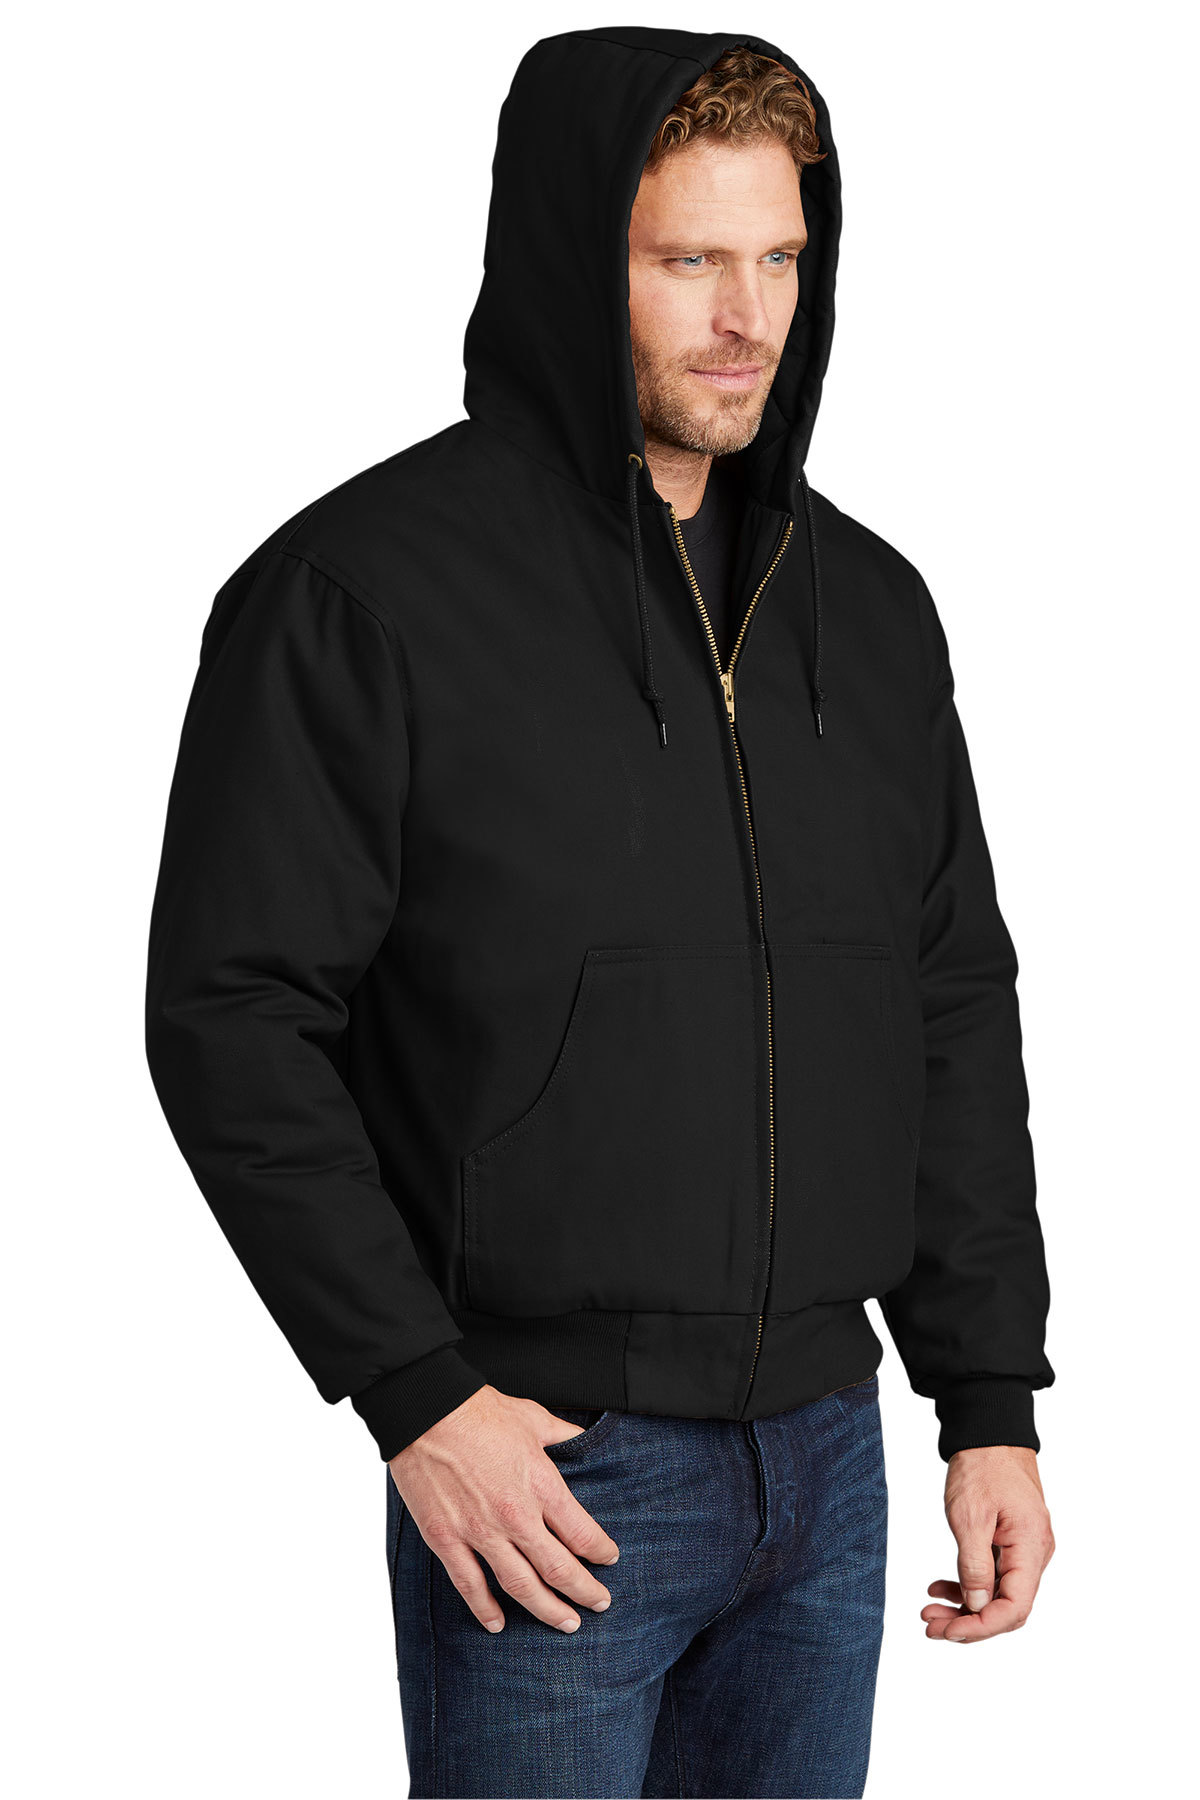 CornerStone - Duck Cloth Hooded Work Jacket | Product | Company Casuals